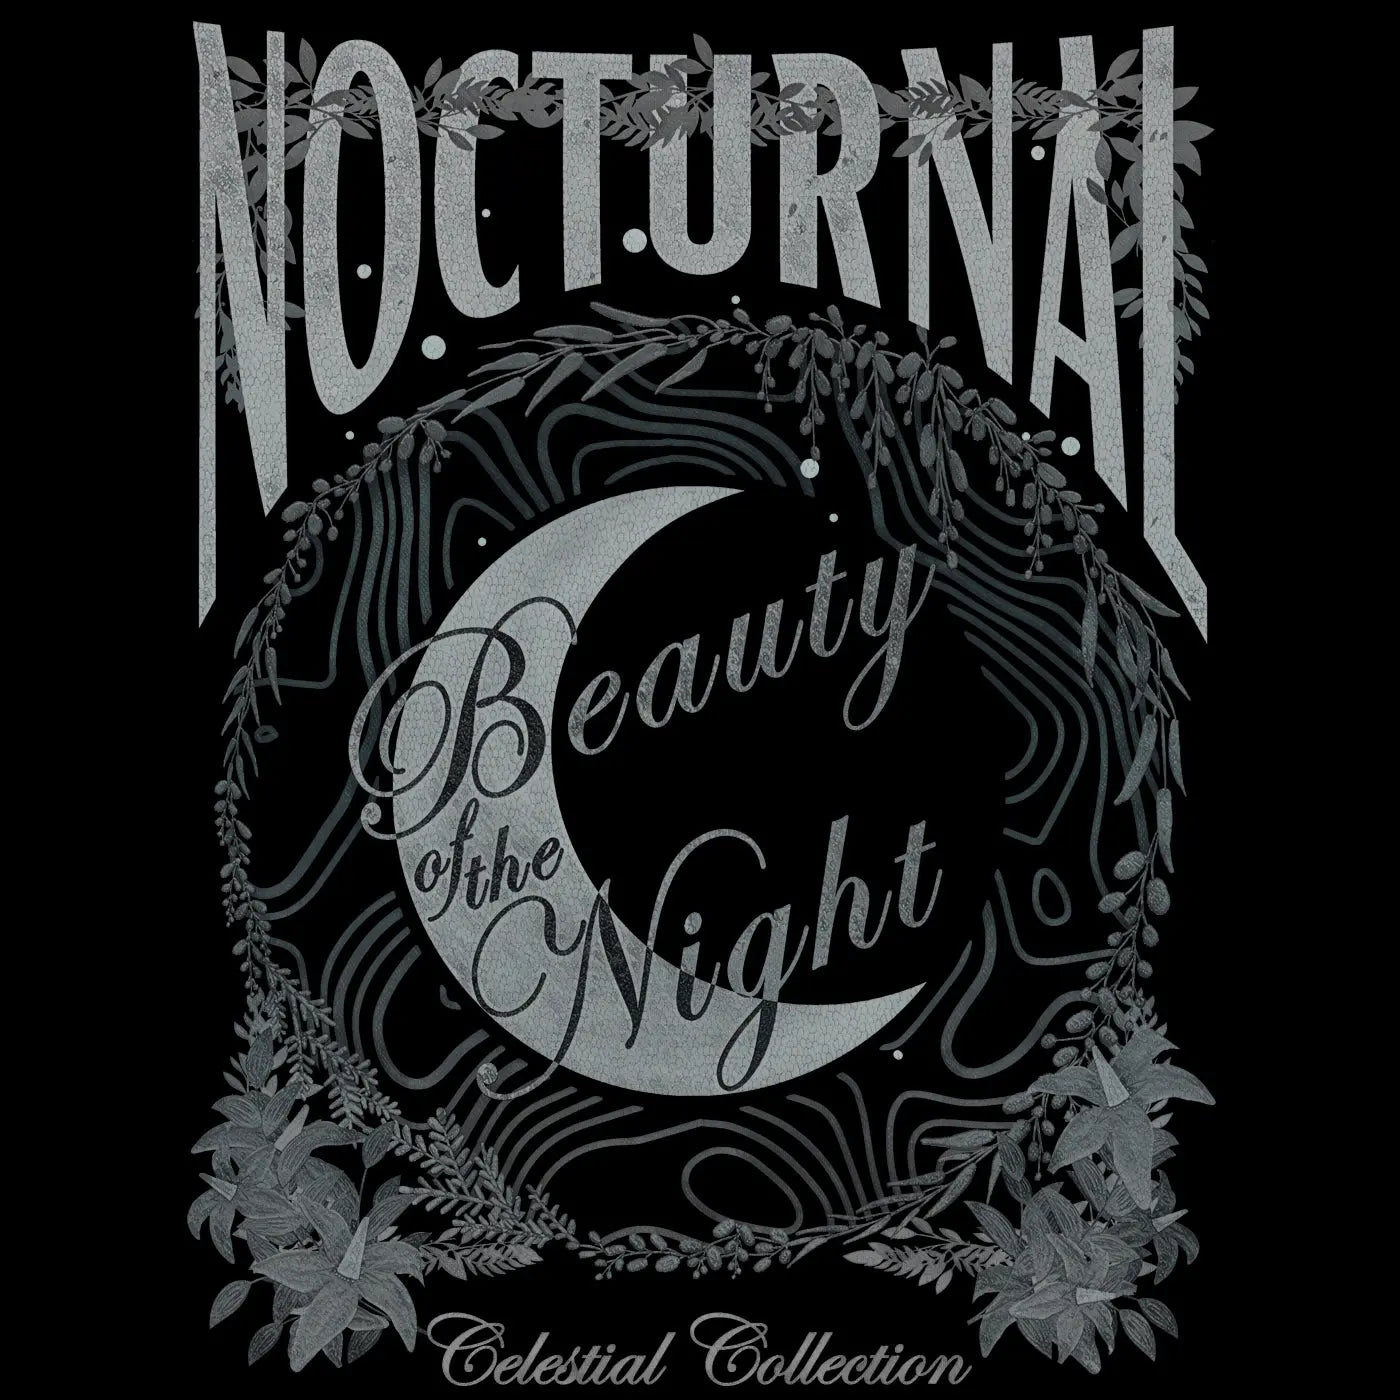 Nocturnal-white - BC Ink Works